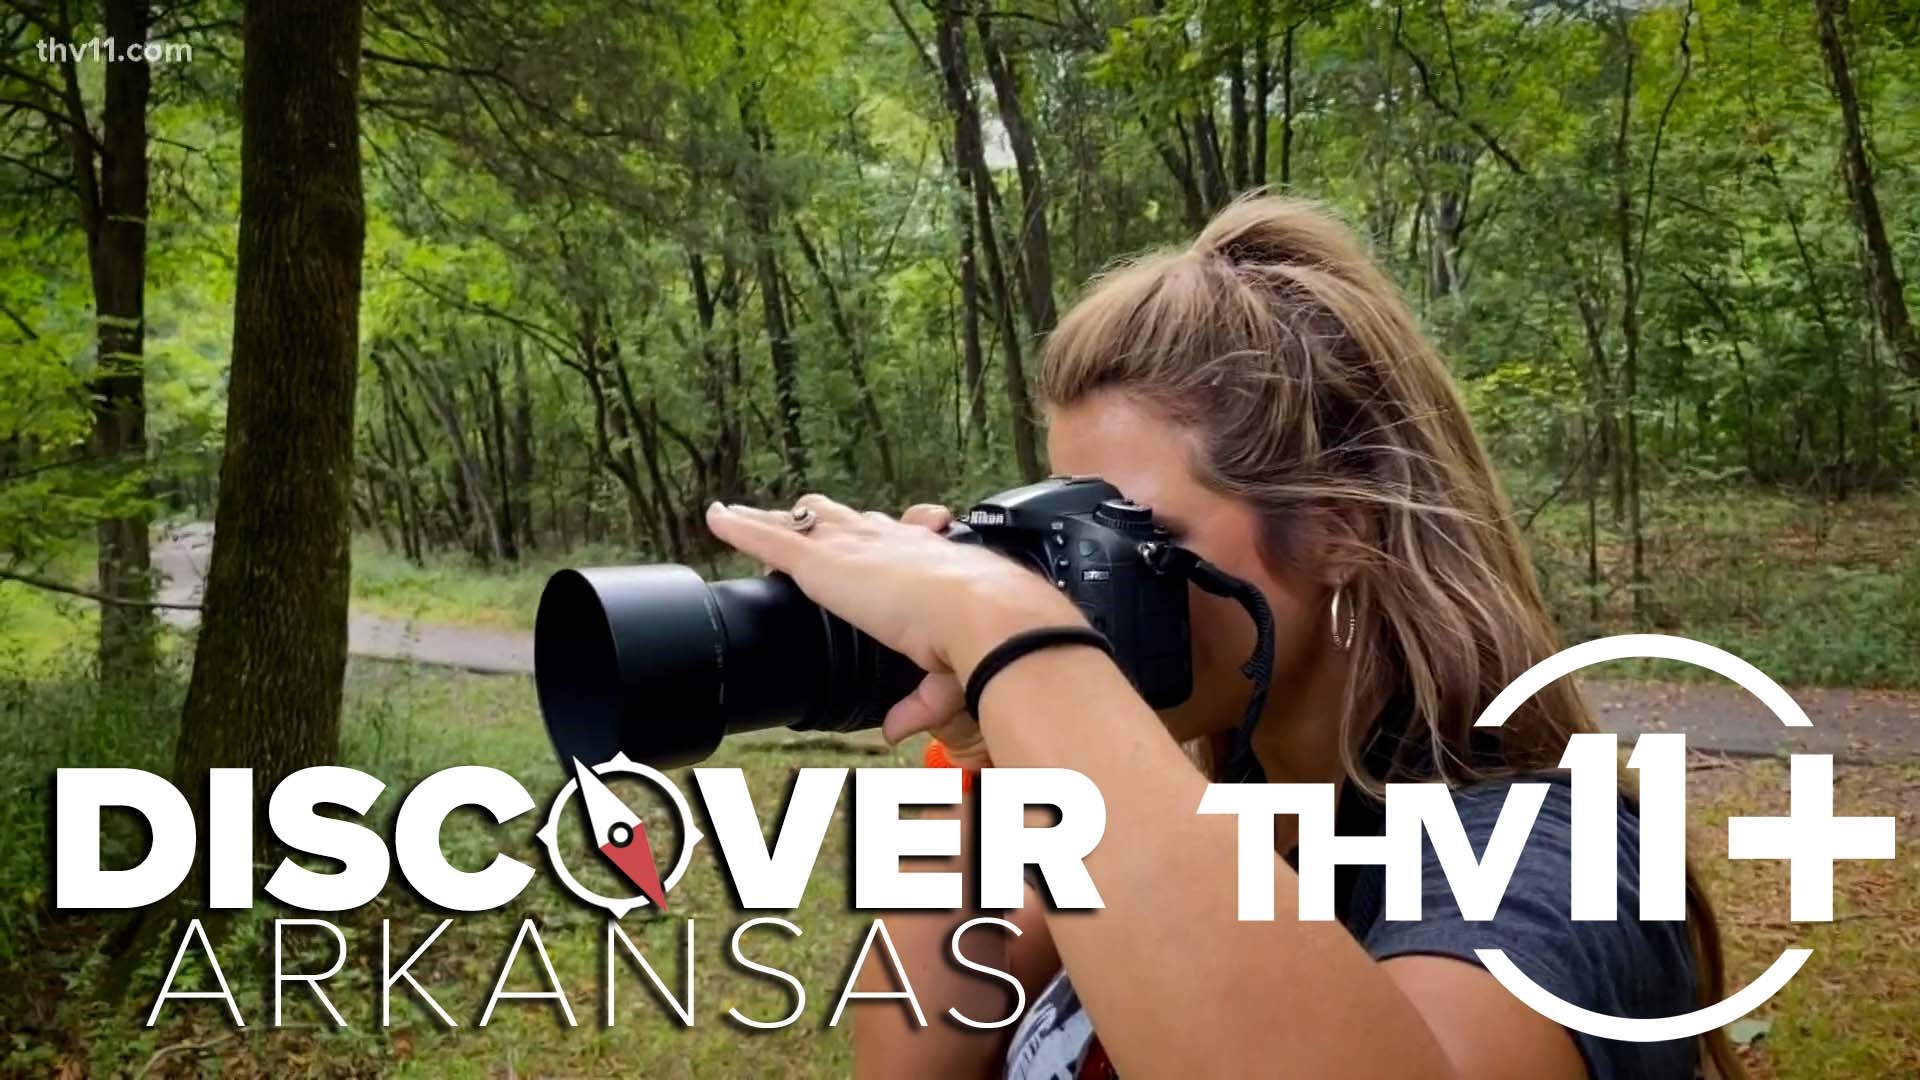 In this episode of Discover Arkansas, Ashley King and Adam Bledsoe take us around the Natural State  to some of the best hiking trails.